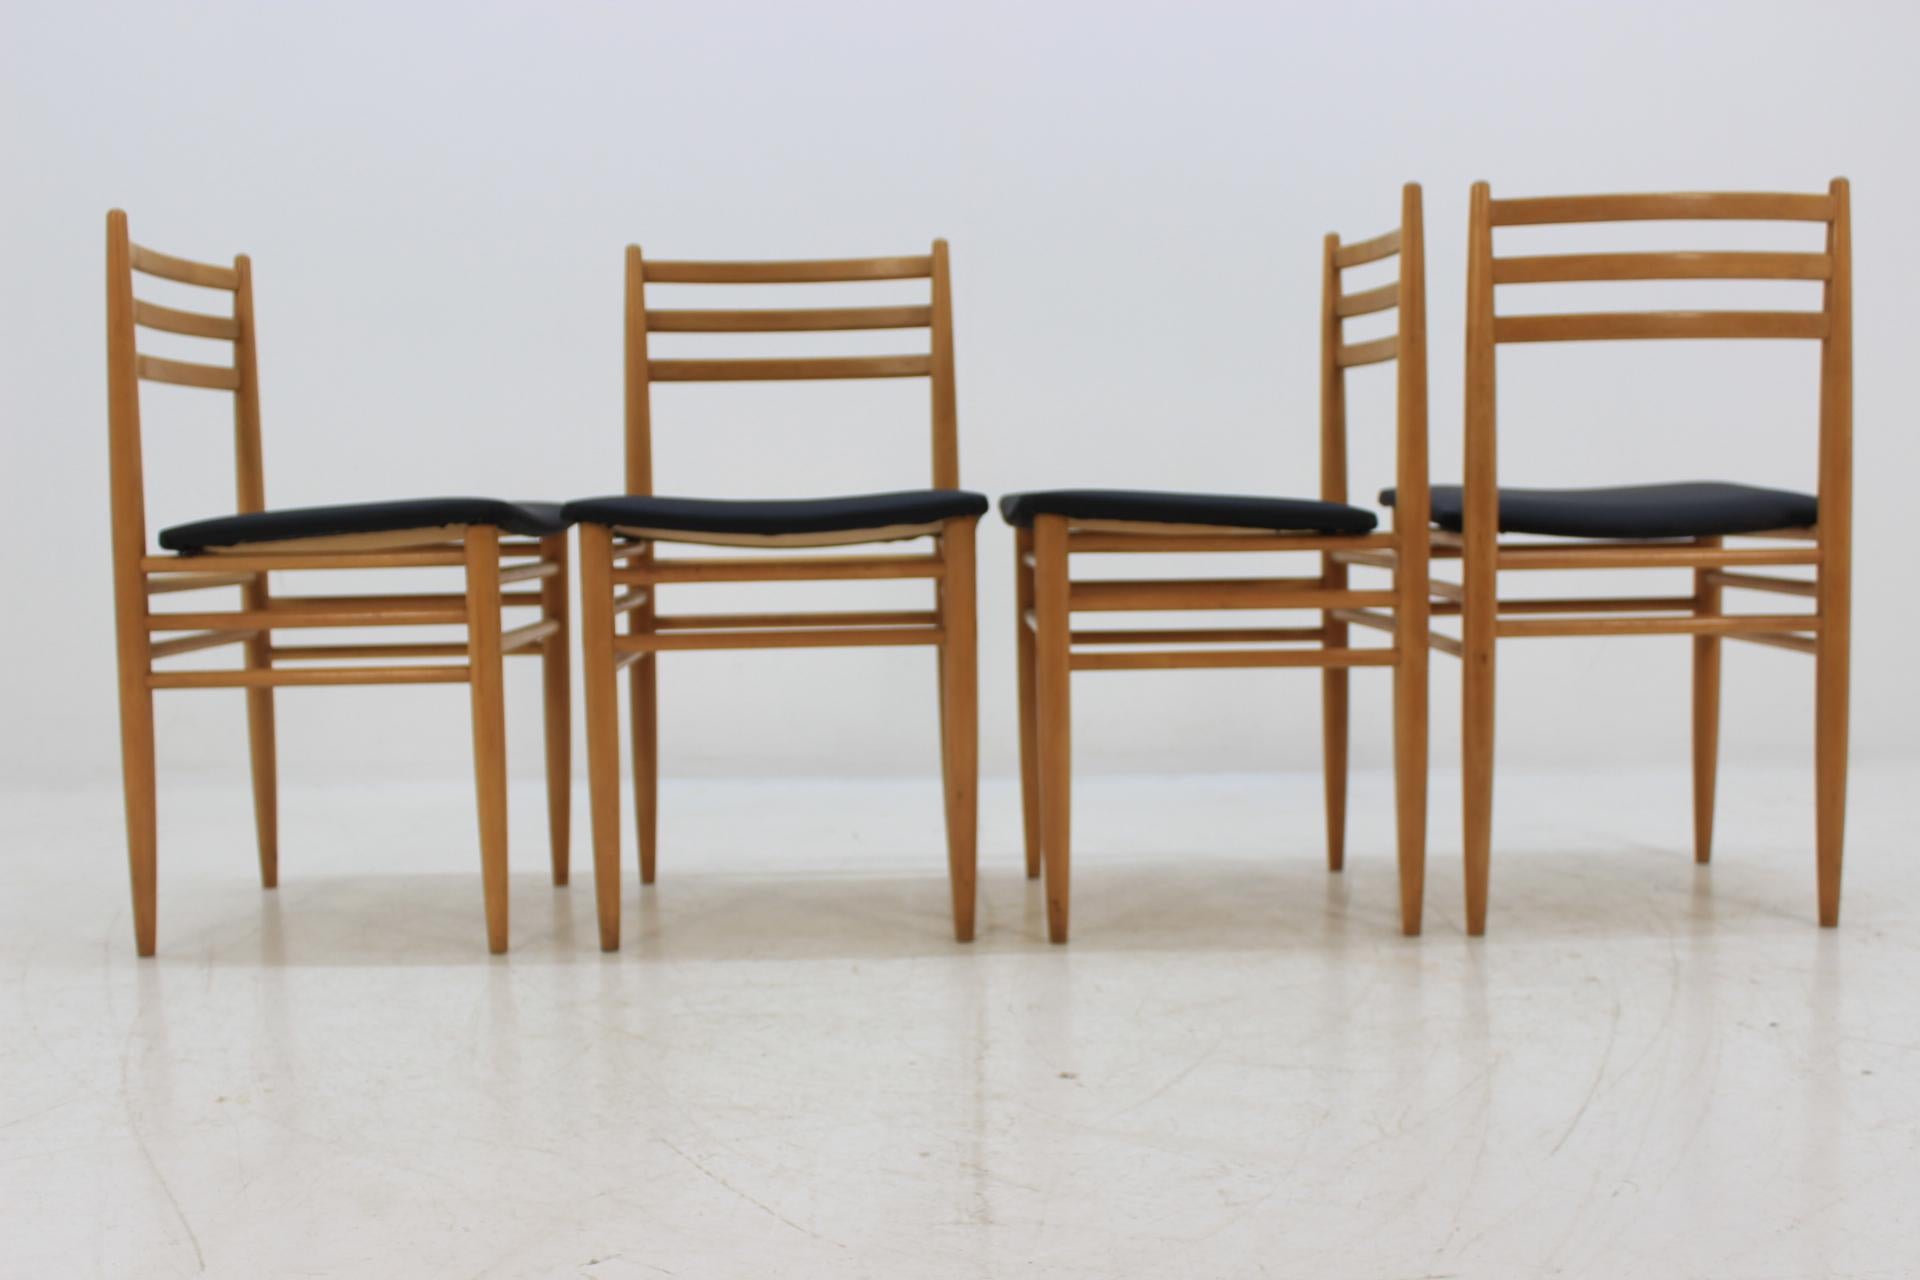 Very practical and confortable dining chairs.